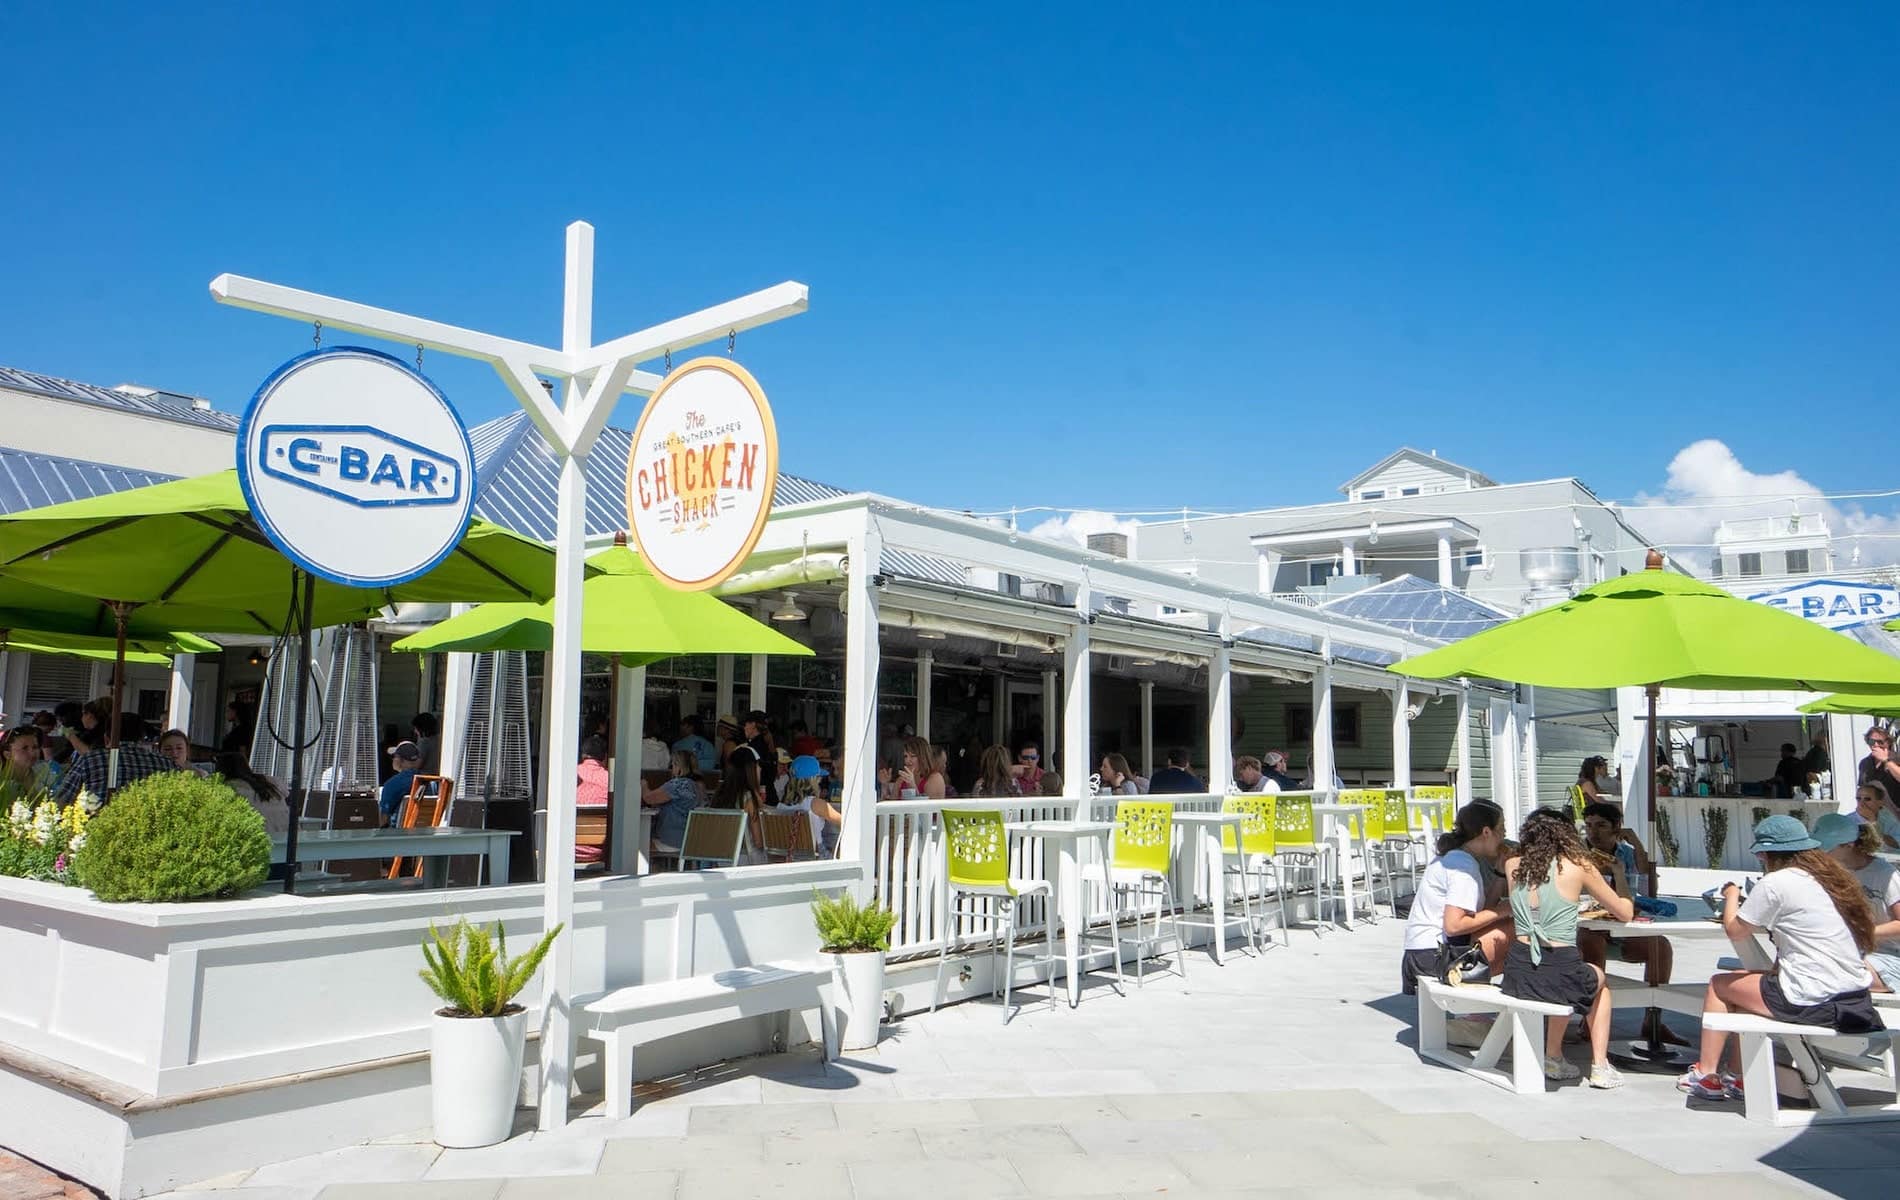 Chicken Shack and C-Bar Bring New Flavors to Seaside, Florida